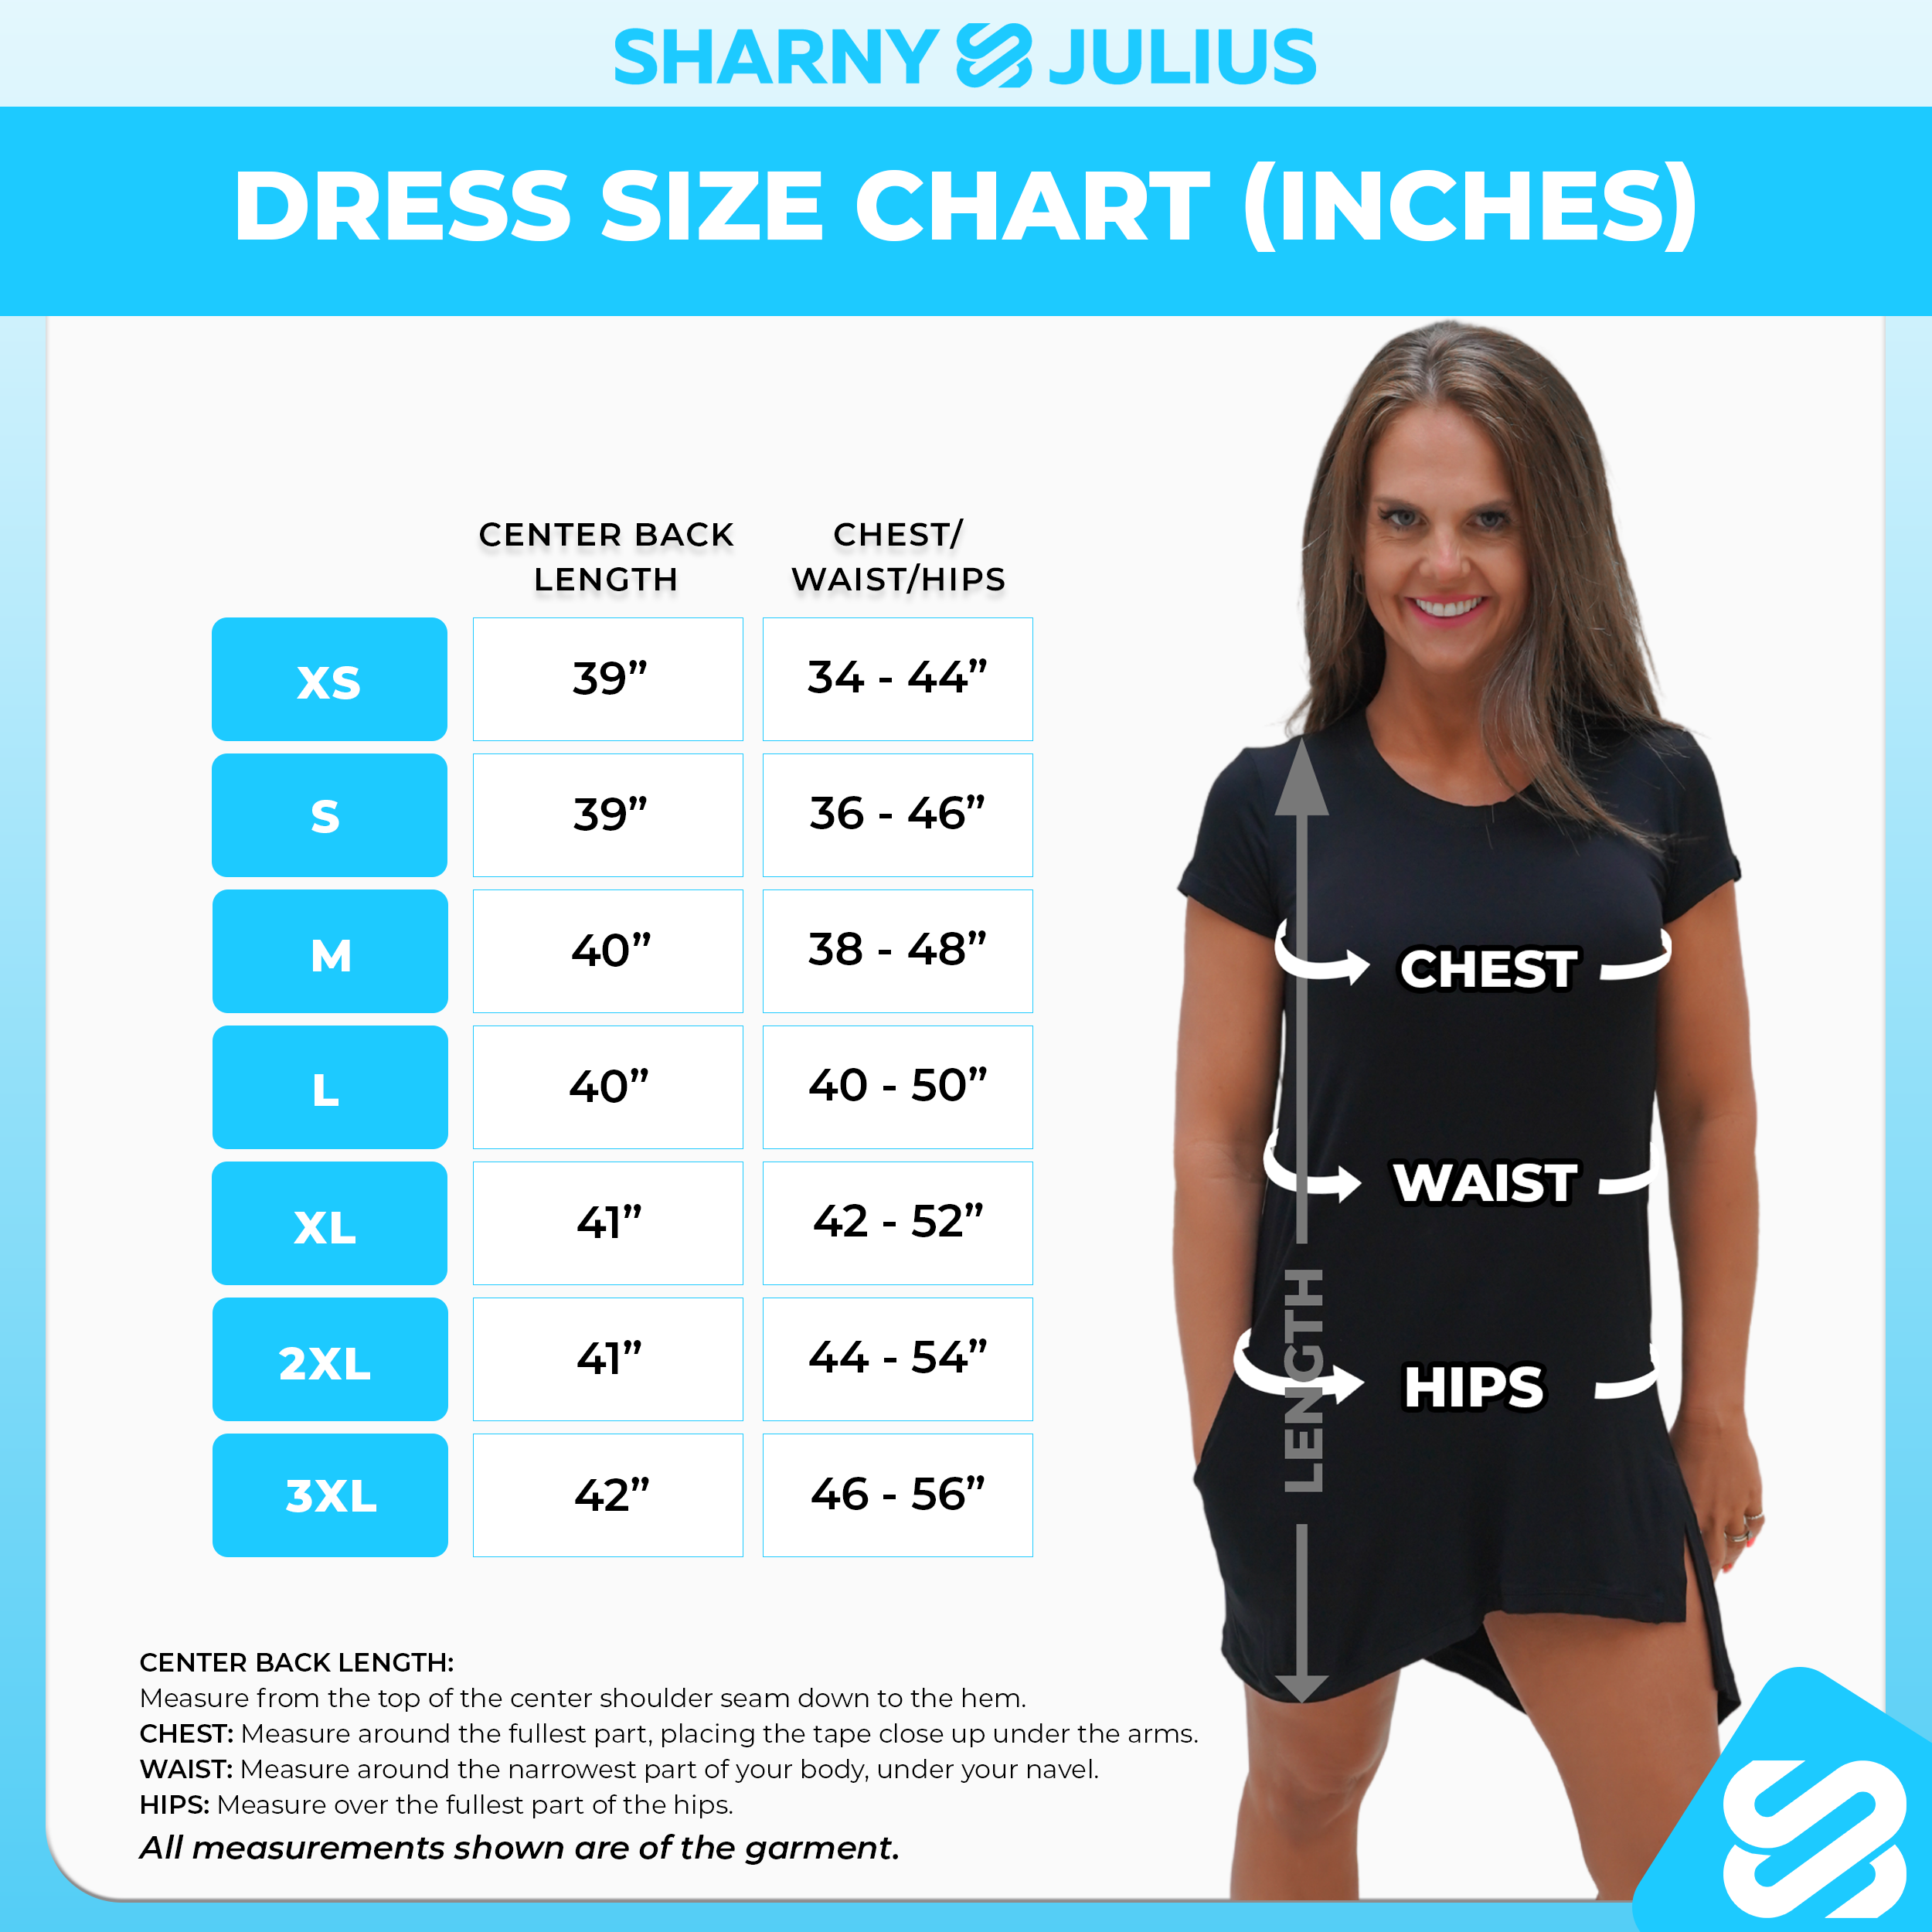 Dress Size Chart (Imperial)